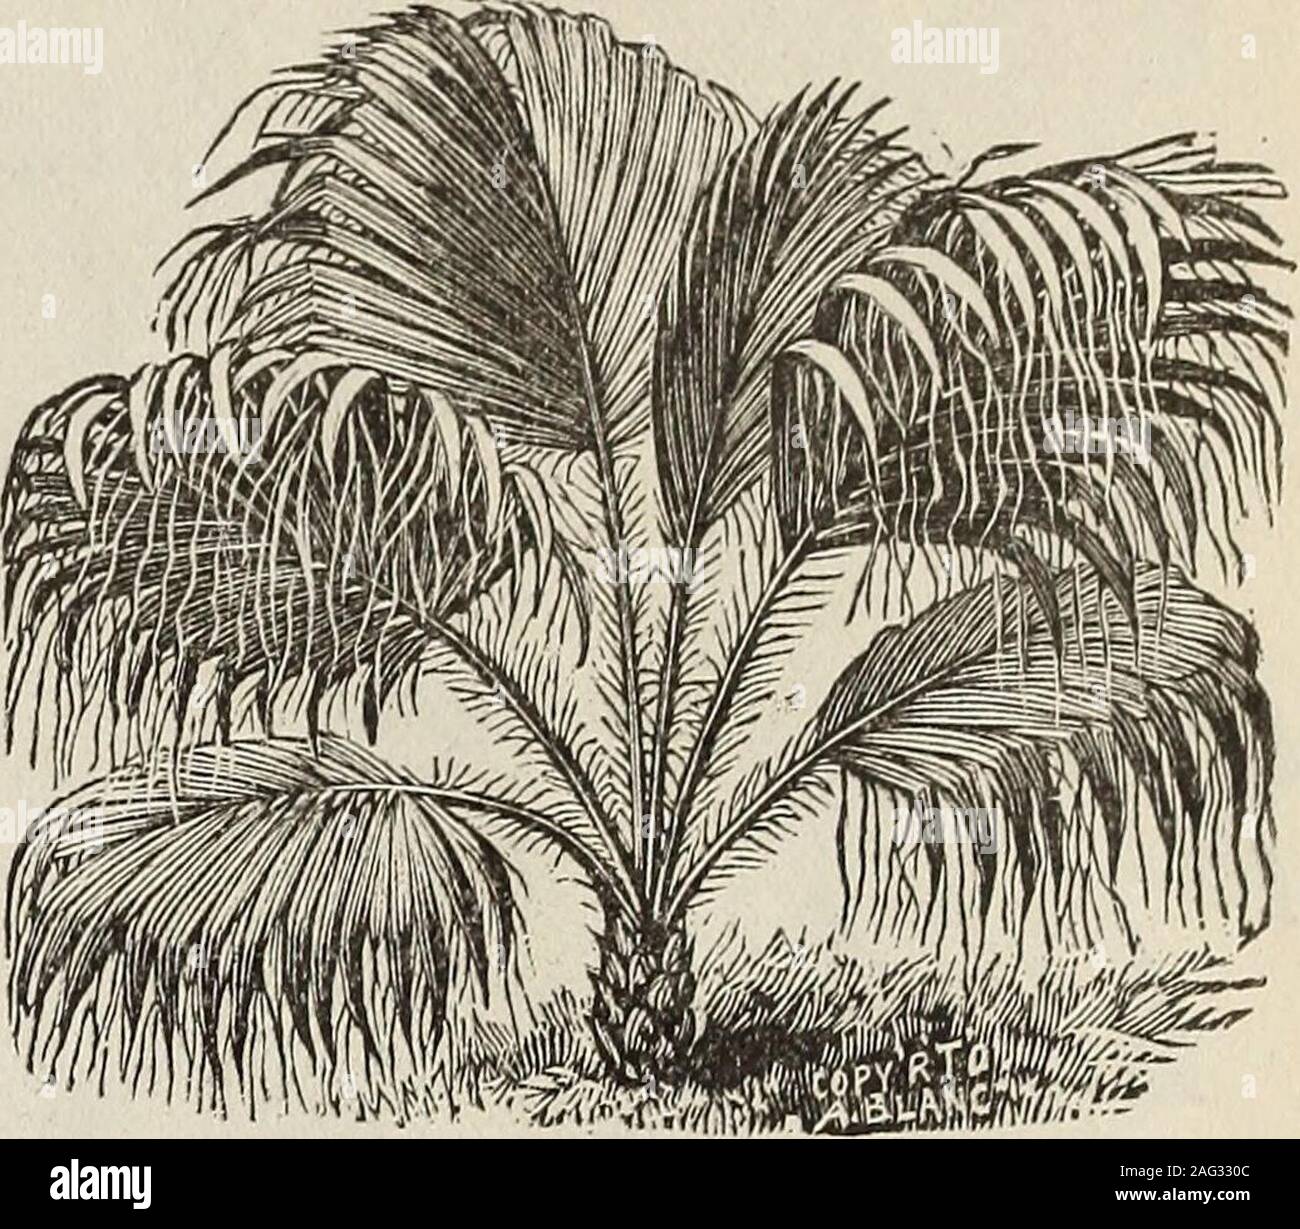 . New floral guide : 1899 plain abridged edition. Ostrich Feather Palrn (Areca Lutescens.) Cocos Weddelliana. One of the grandest and most beautiful palms for house culture now known.The foliage is rich glossy green with bright yellow stems, full of grace andbeauty ; hardy and easily grown ; and grows more beautiful as it grows older and larger. The palms require no special treat-ment. Will all thrive in parlor or living-room. Good, strong plants, 12 in high, 3fronds, 30c each, postpaid. 18-in , 4 fronds, ostrich Stock Photo